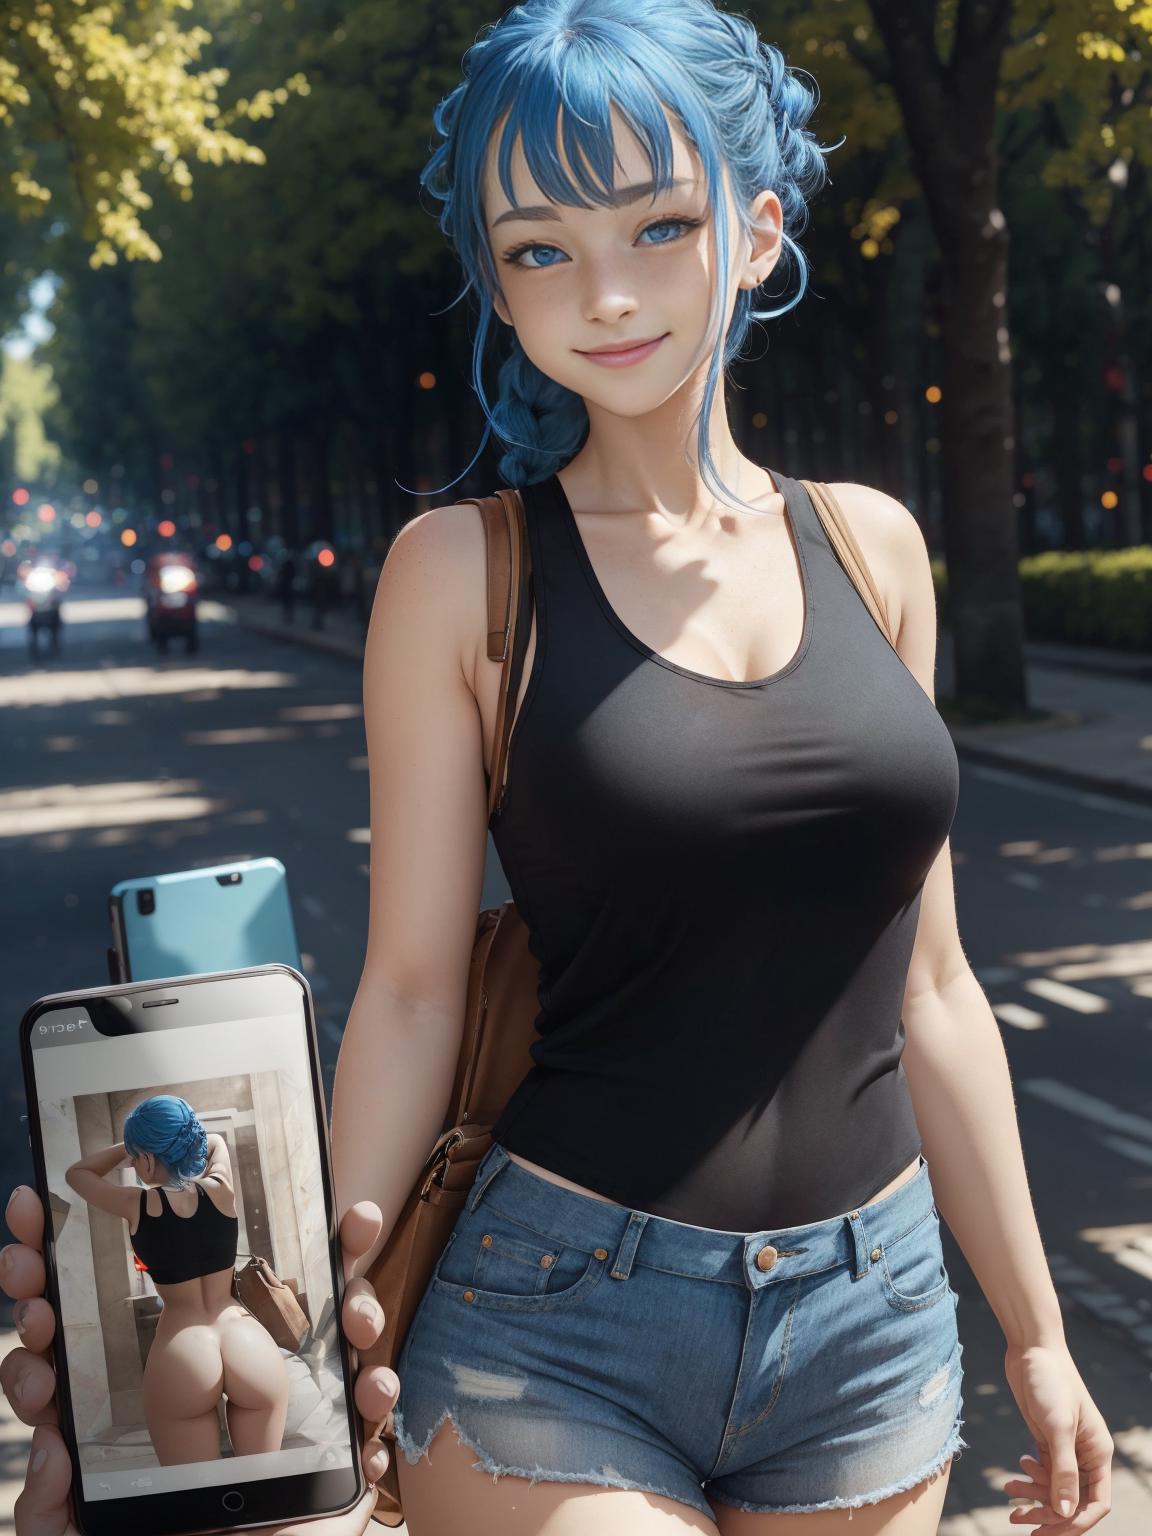 AI model image by _latent